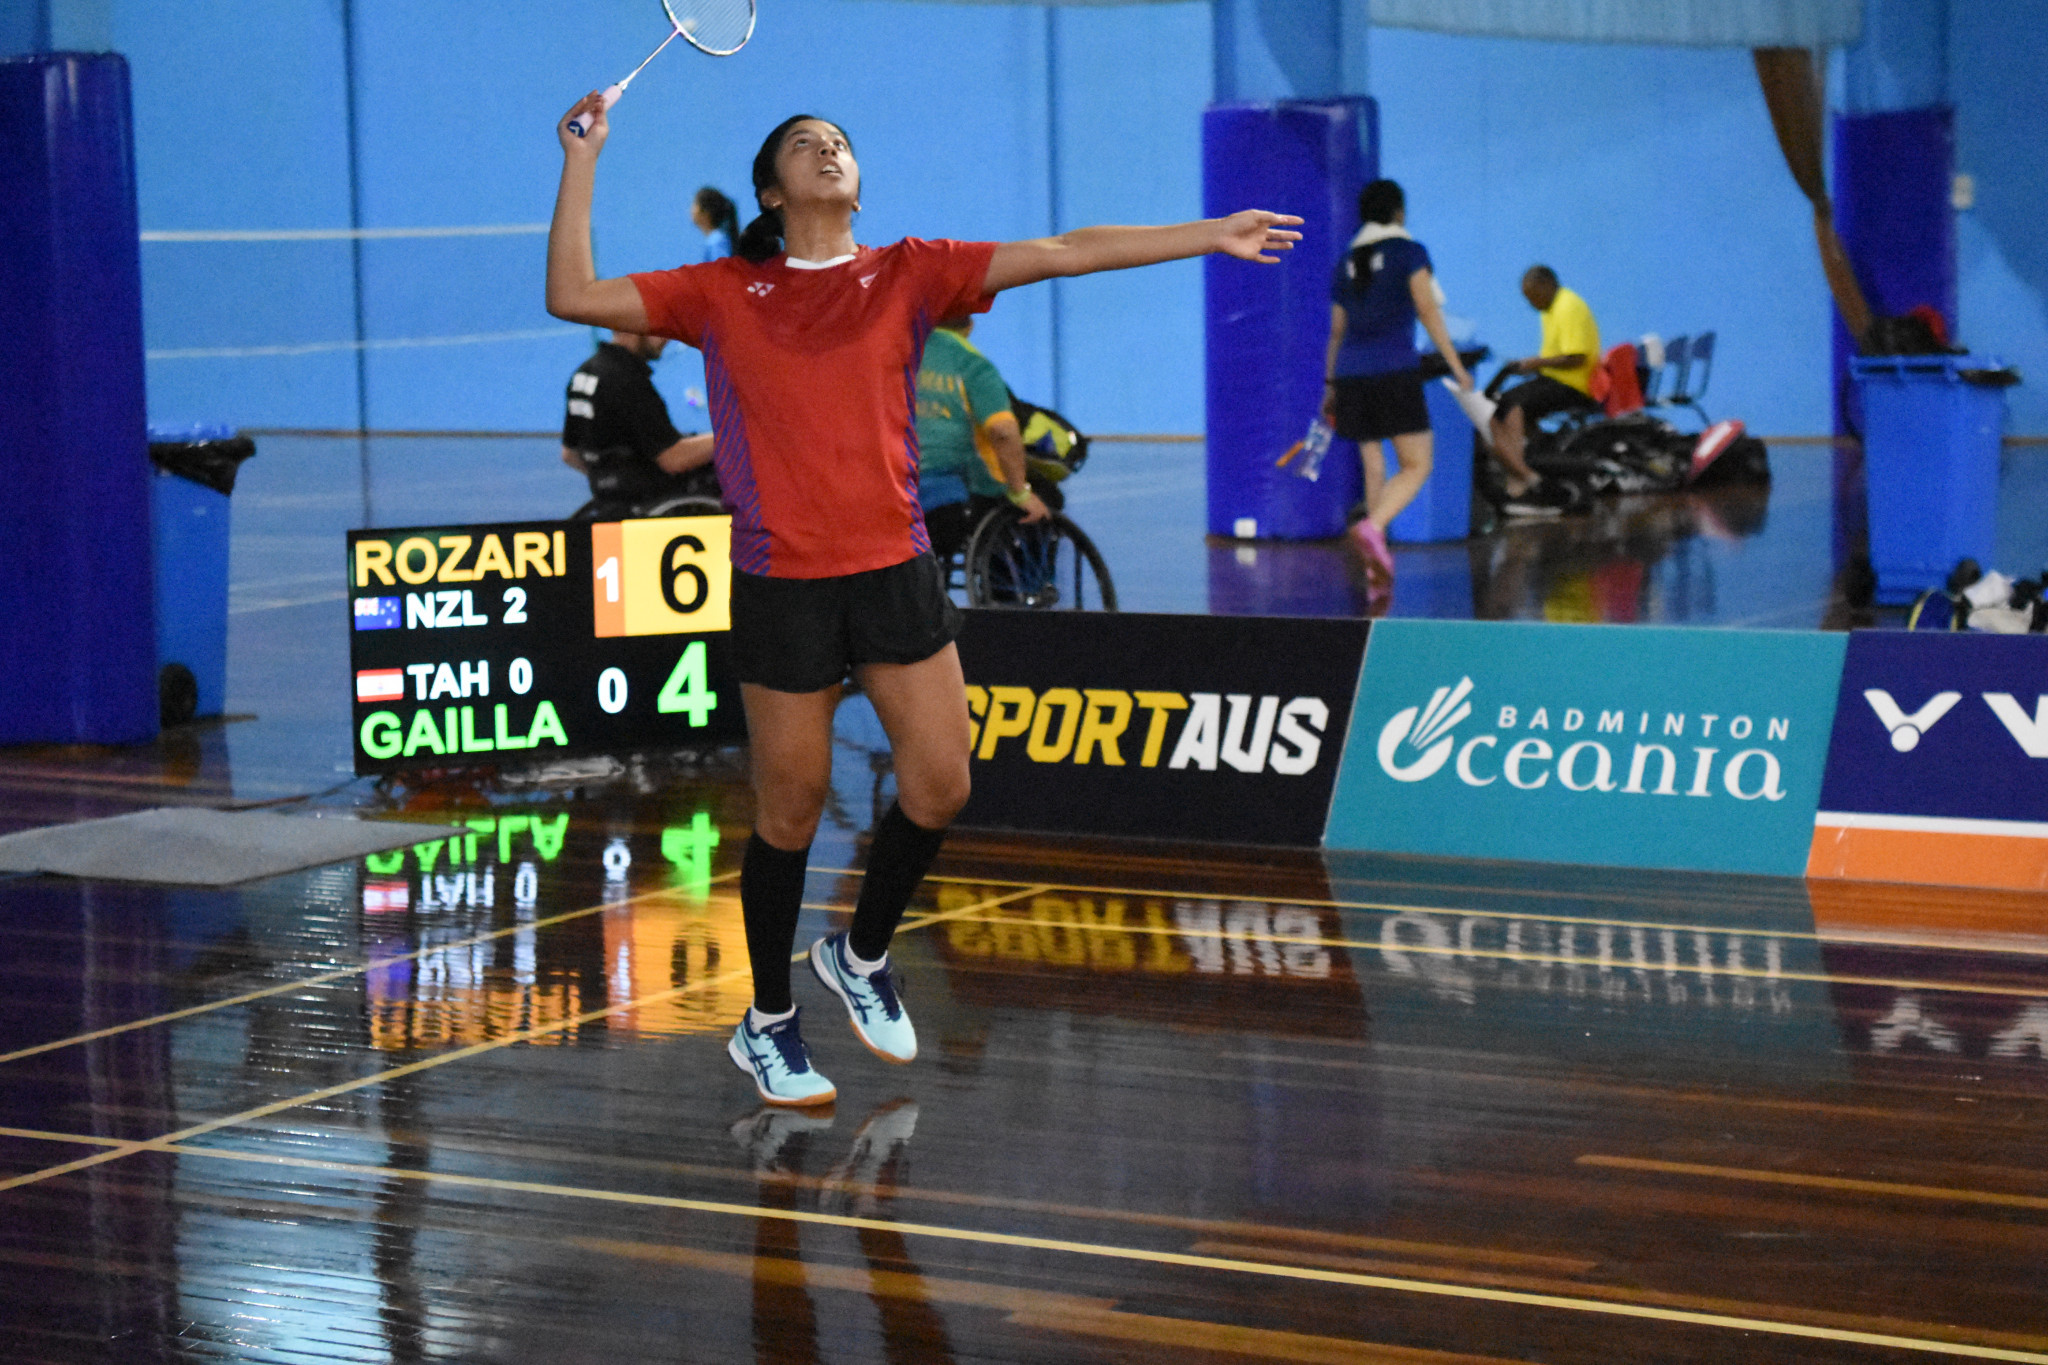 Catelyn Rozario of New Zealand on her way to take her nation's third win over Tahiti ©Badminton Oceania